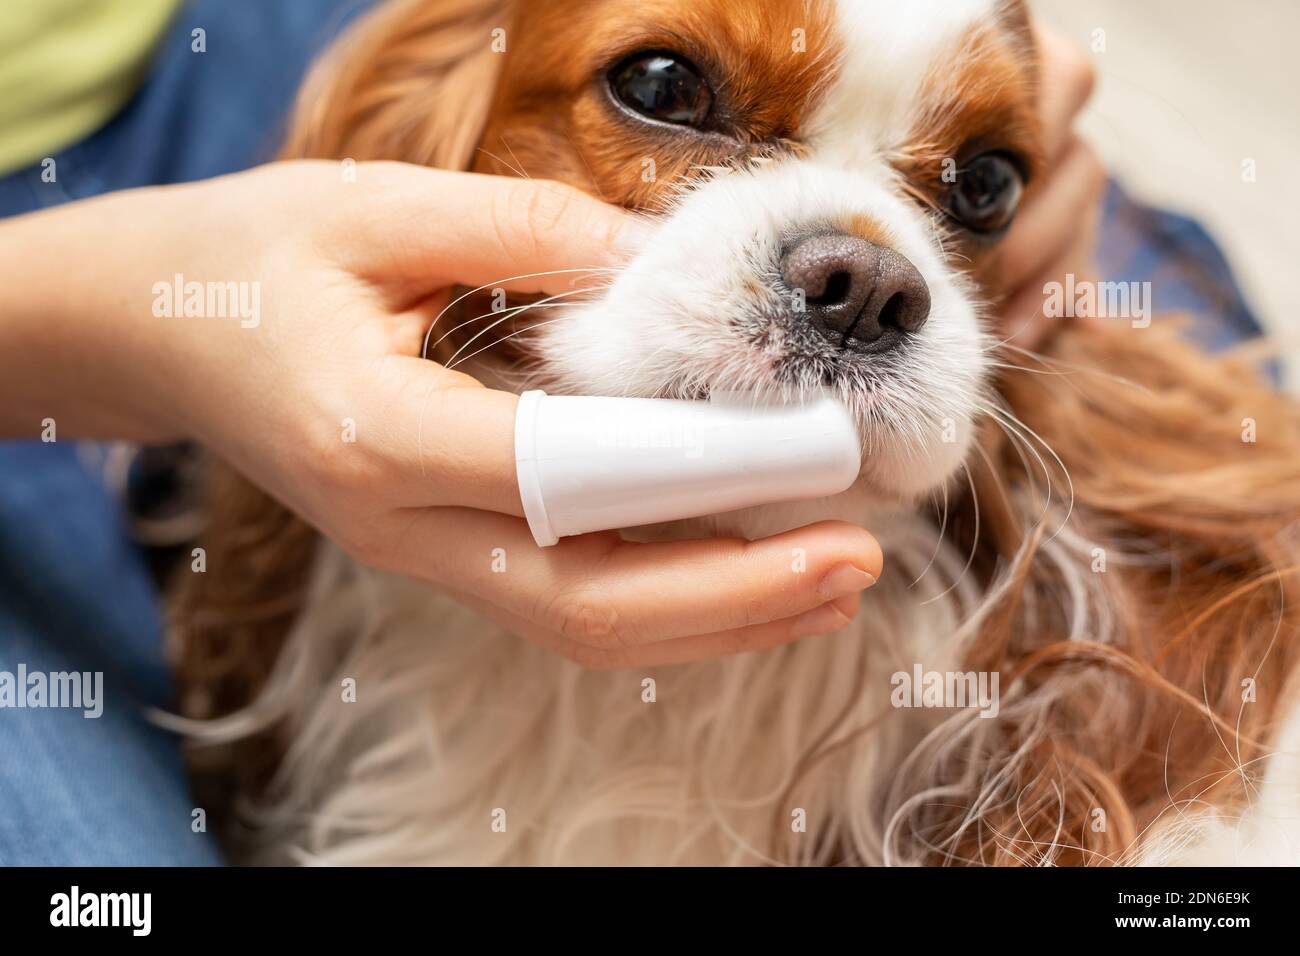 Home cleaning of teeth Cute dog Cavalier King Charles Spaniel. Taking care of animal. Close-up photo Stock Photo